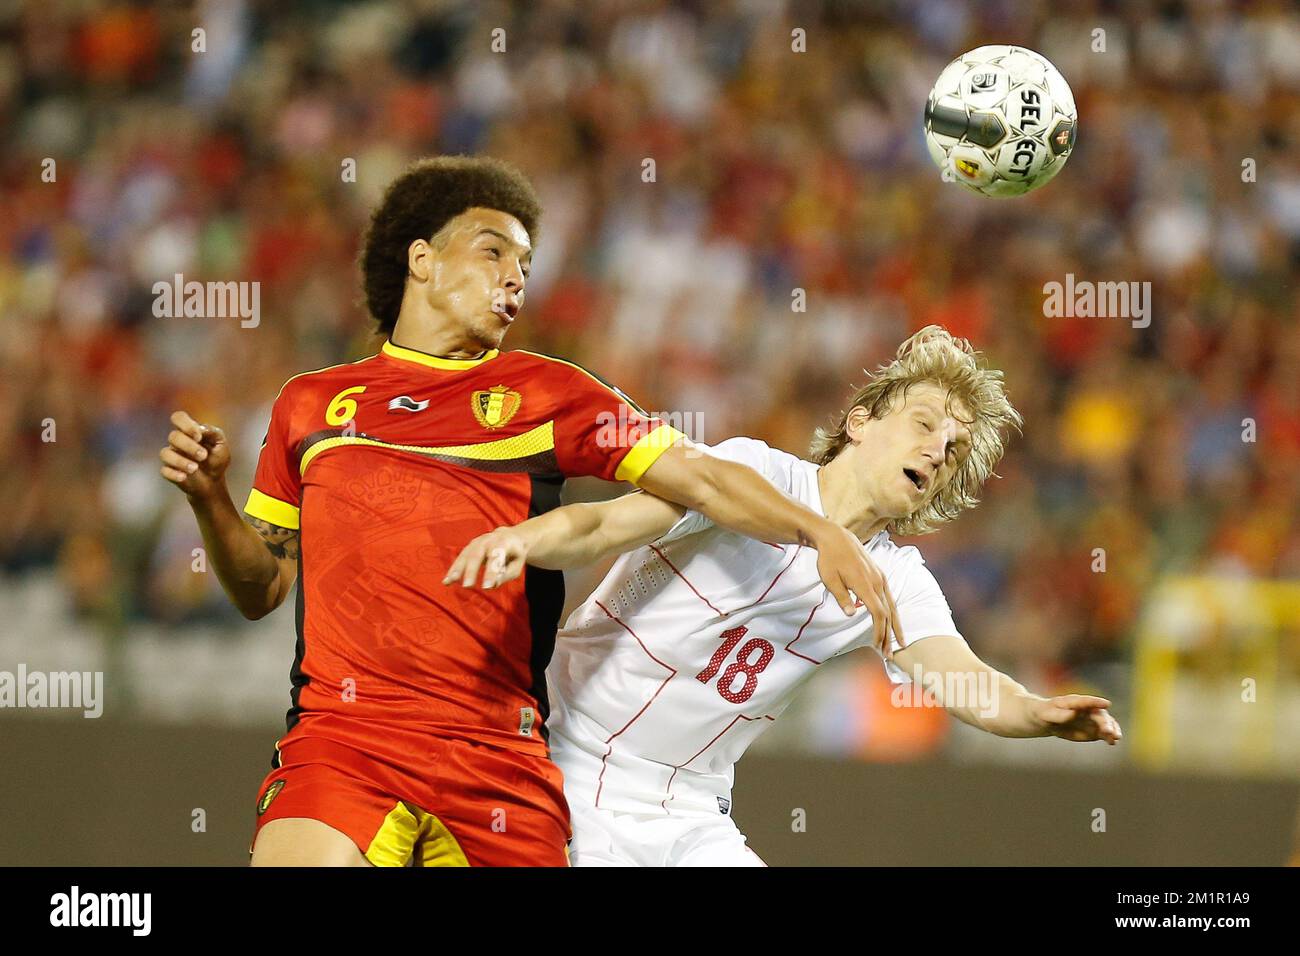 Belgium's Axel Witsel and Serbia's Basta fight for the ball during a match of the Belgian national soccer team 'Red Devils' against the Serbian national soccer team, Friday 07 June 2013 in Brussels. The game is part of the qualifying matches for the 2014 FIFA World Cup.  Stock Photo